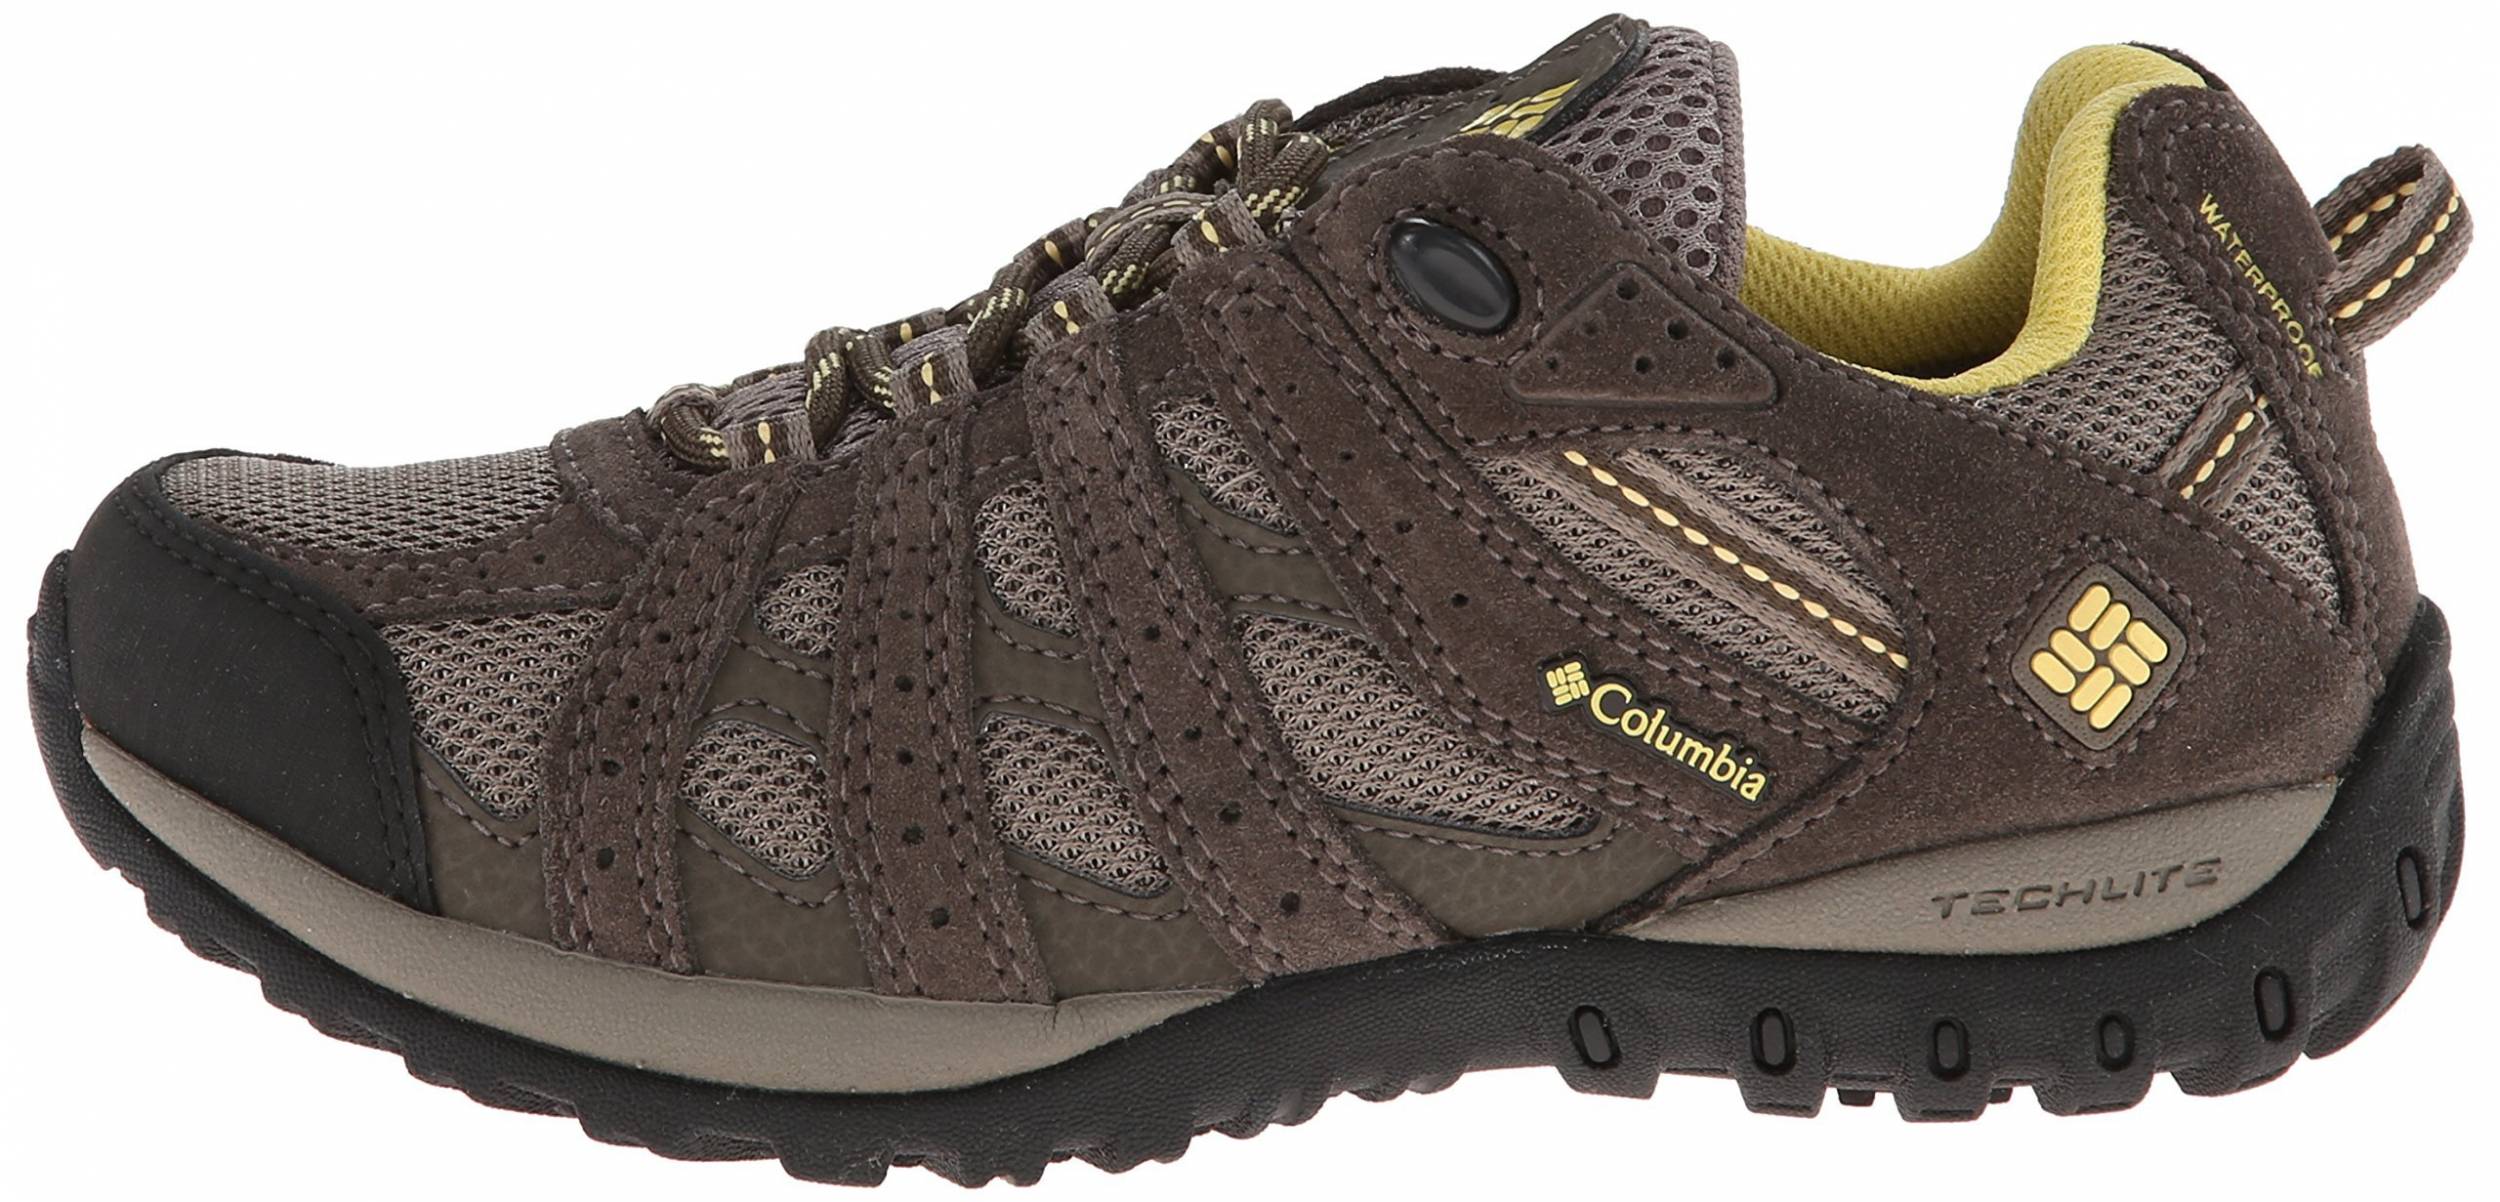 Save 48% on Columbia Hiking Shoes (21 